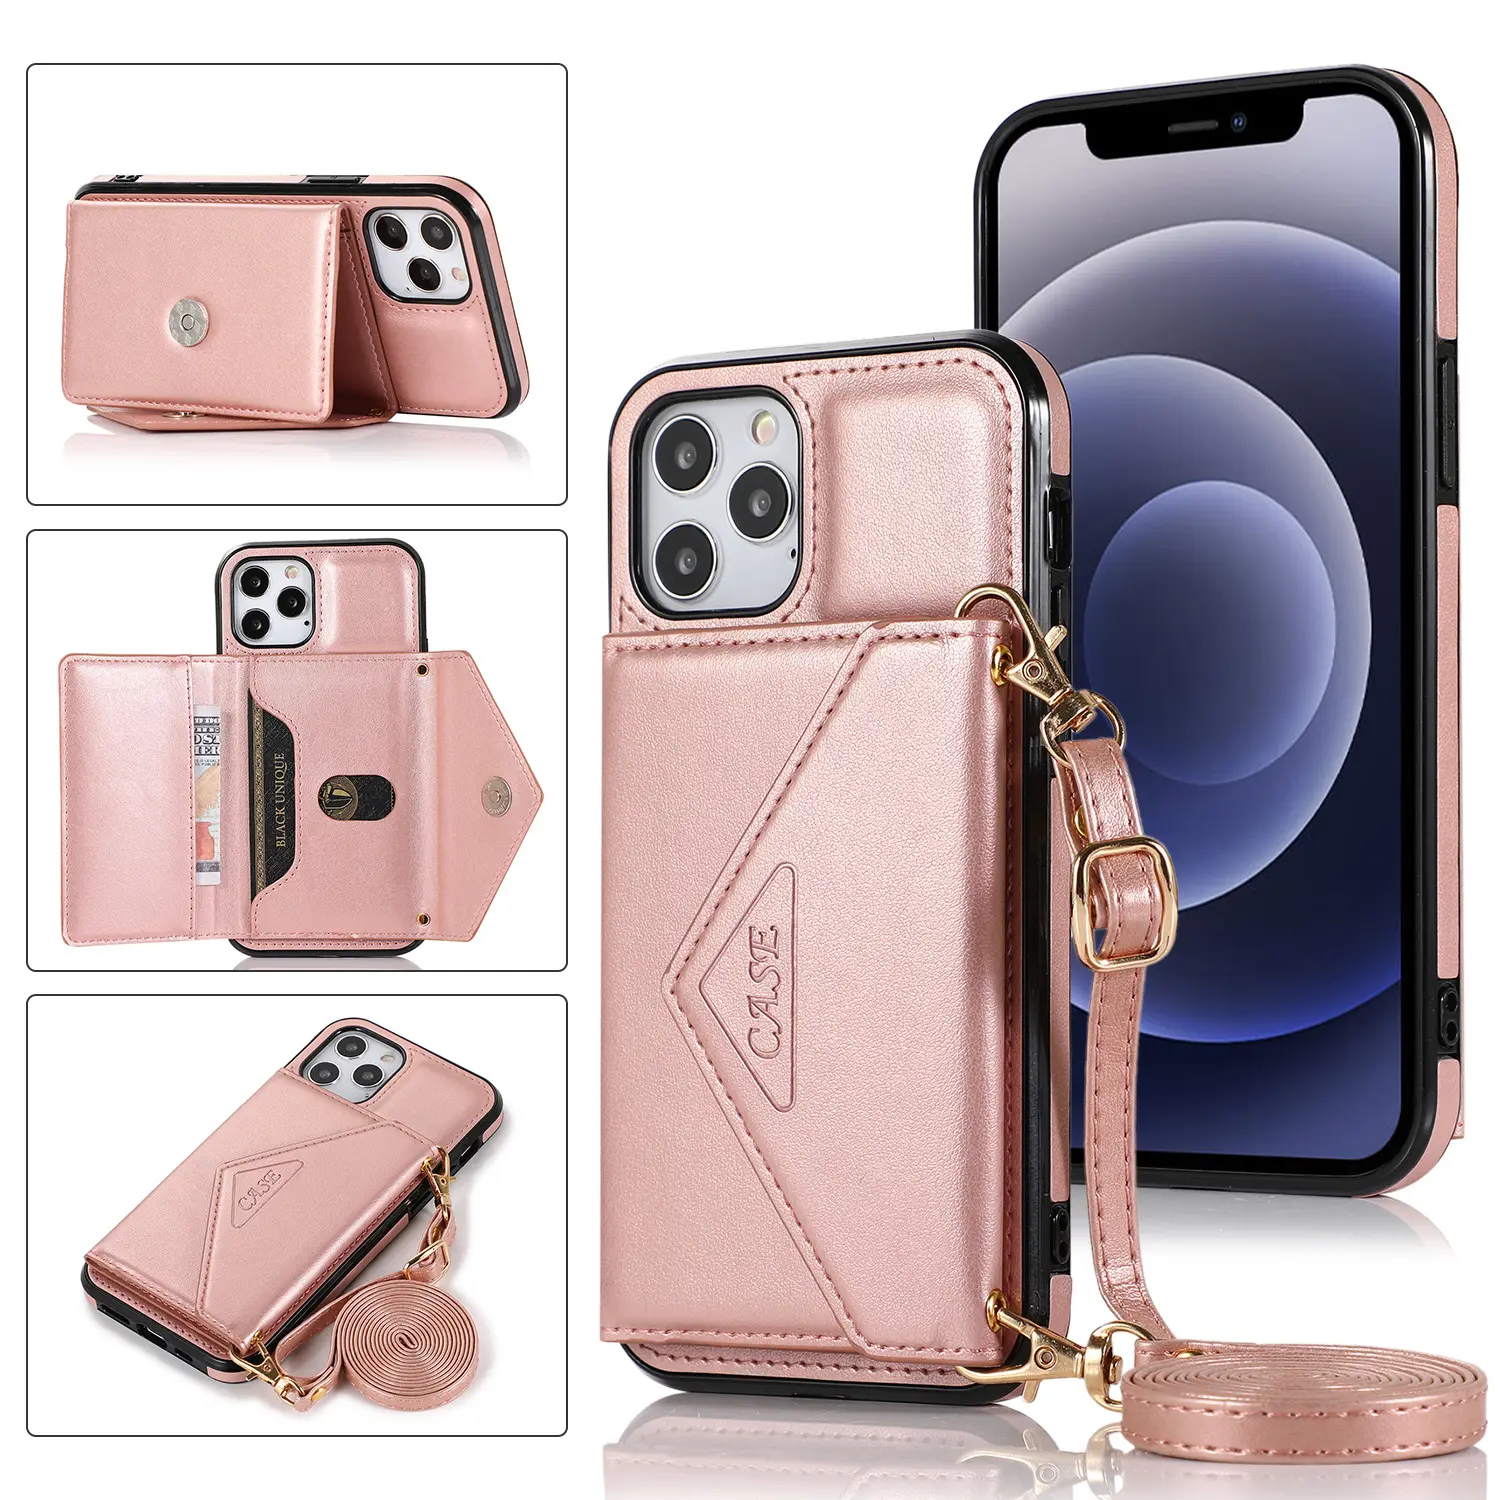 Focuses Luxury Cover 2 in 1 Detachable Card Holder Wallet Stand Phone Case For iPhone Max mobile phone leather case